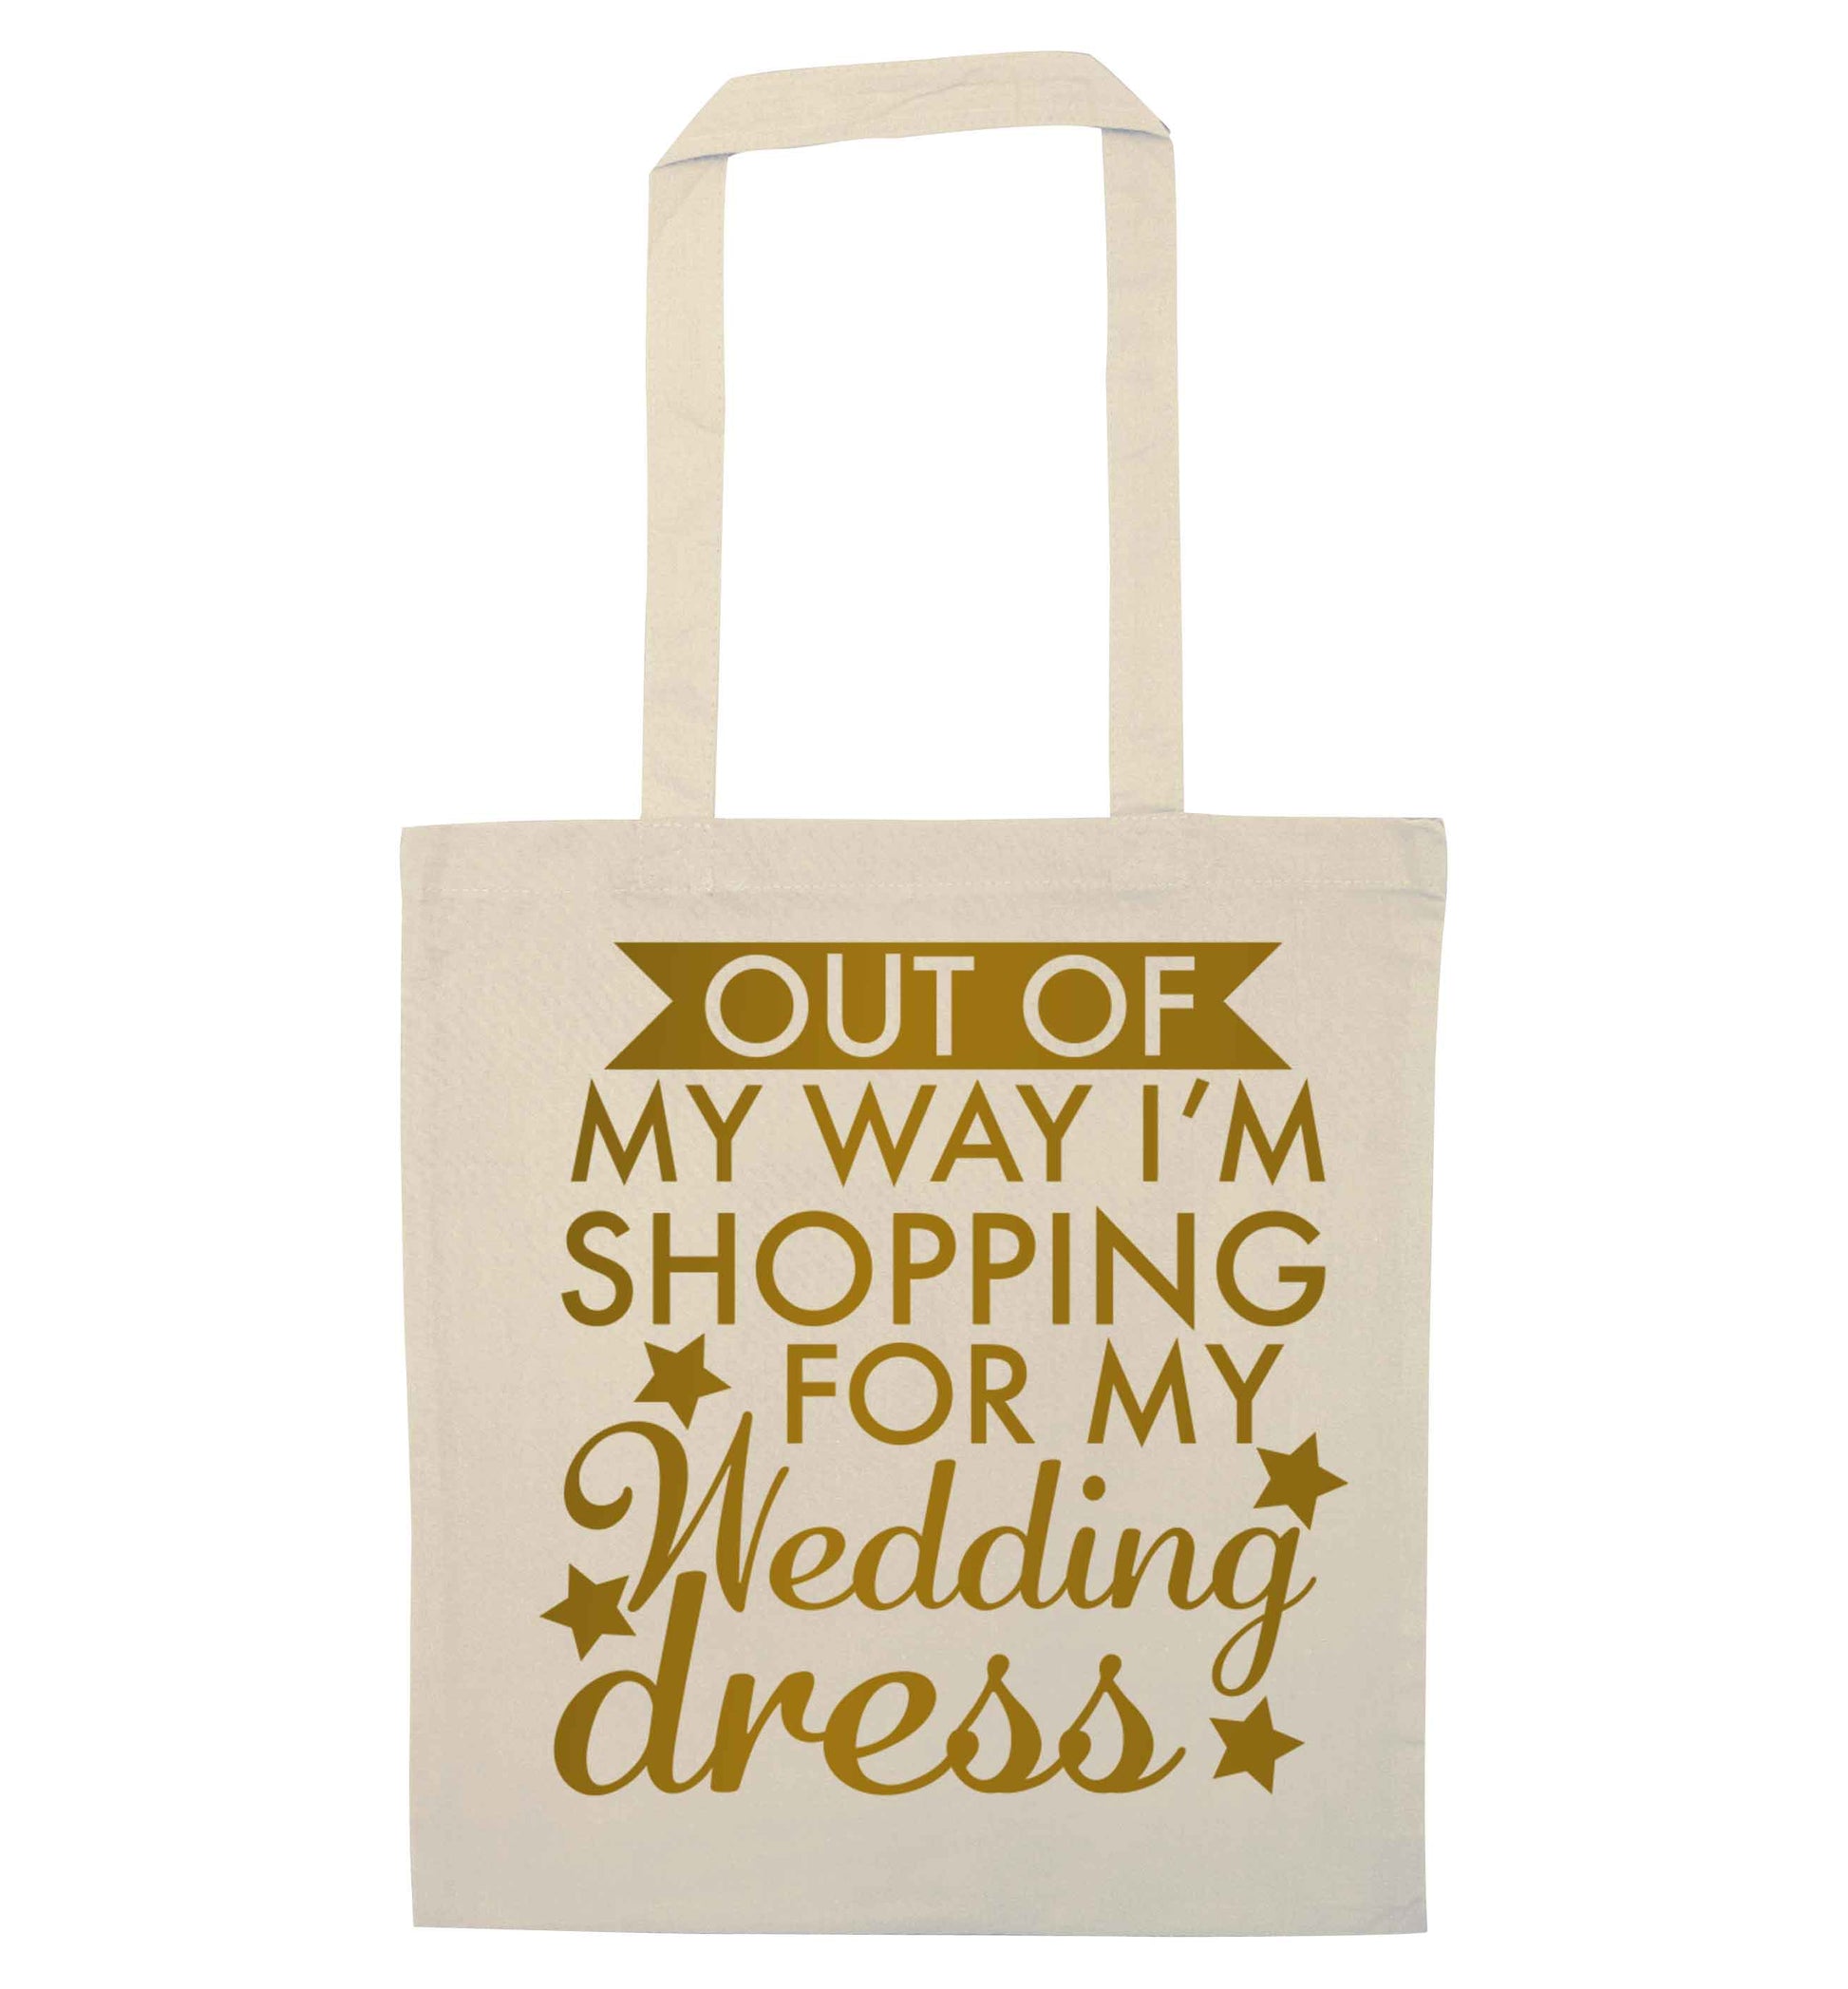 Out of my way I'm shopping for my wedding dress natural tote bag